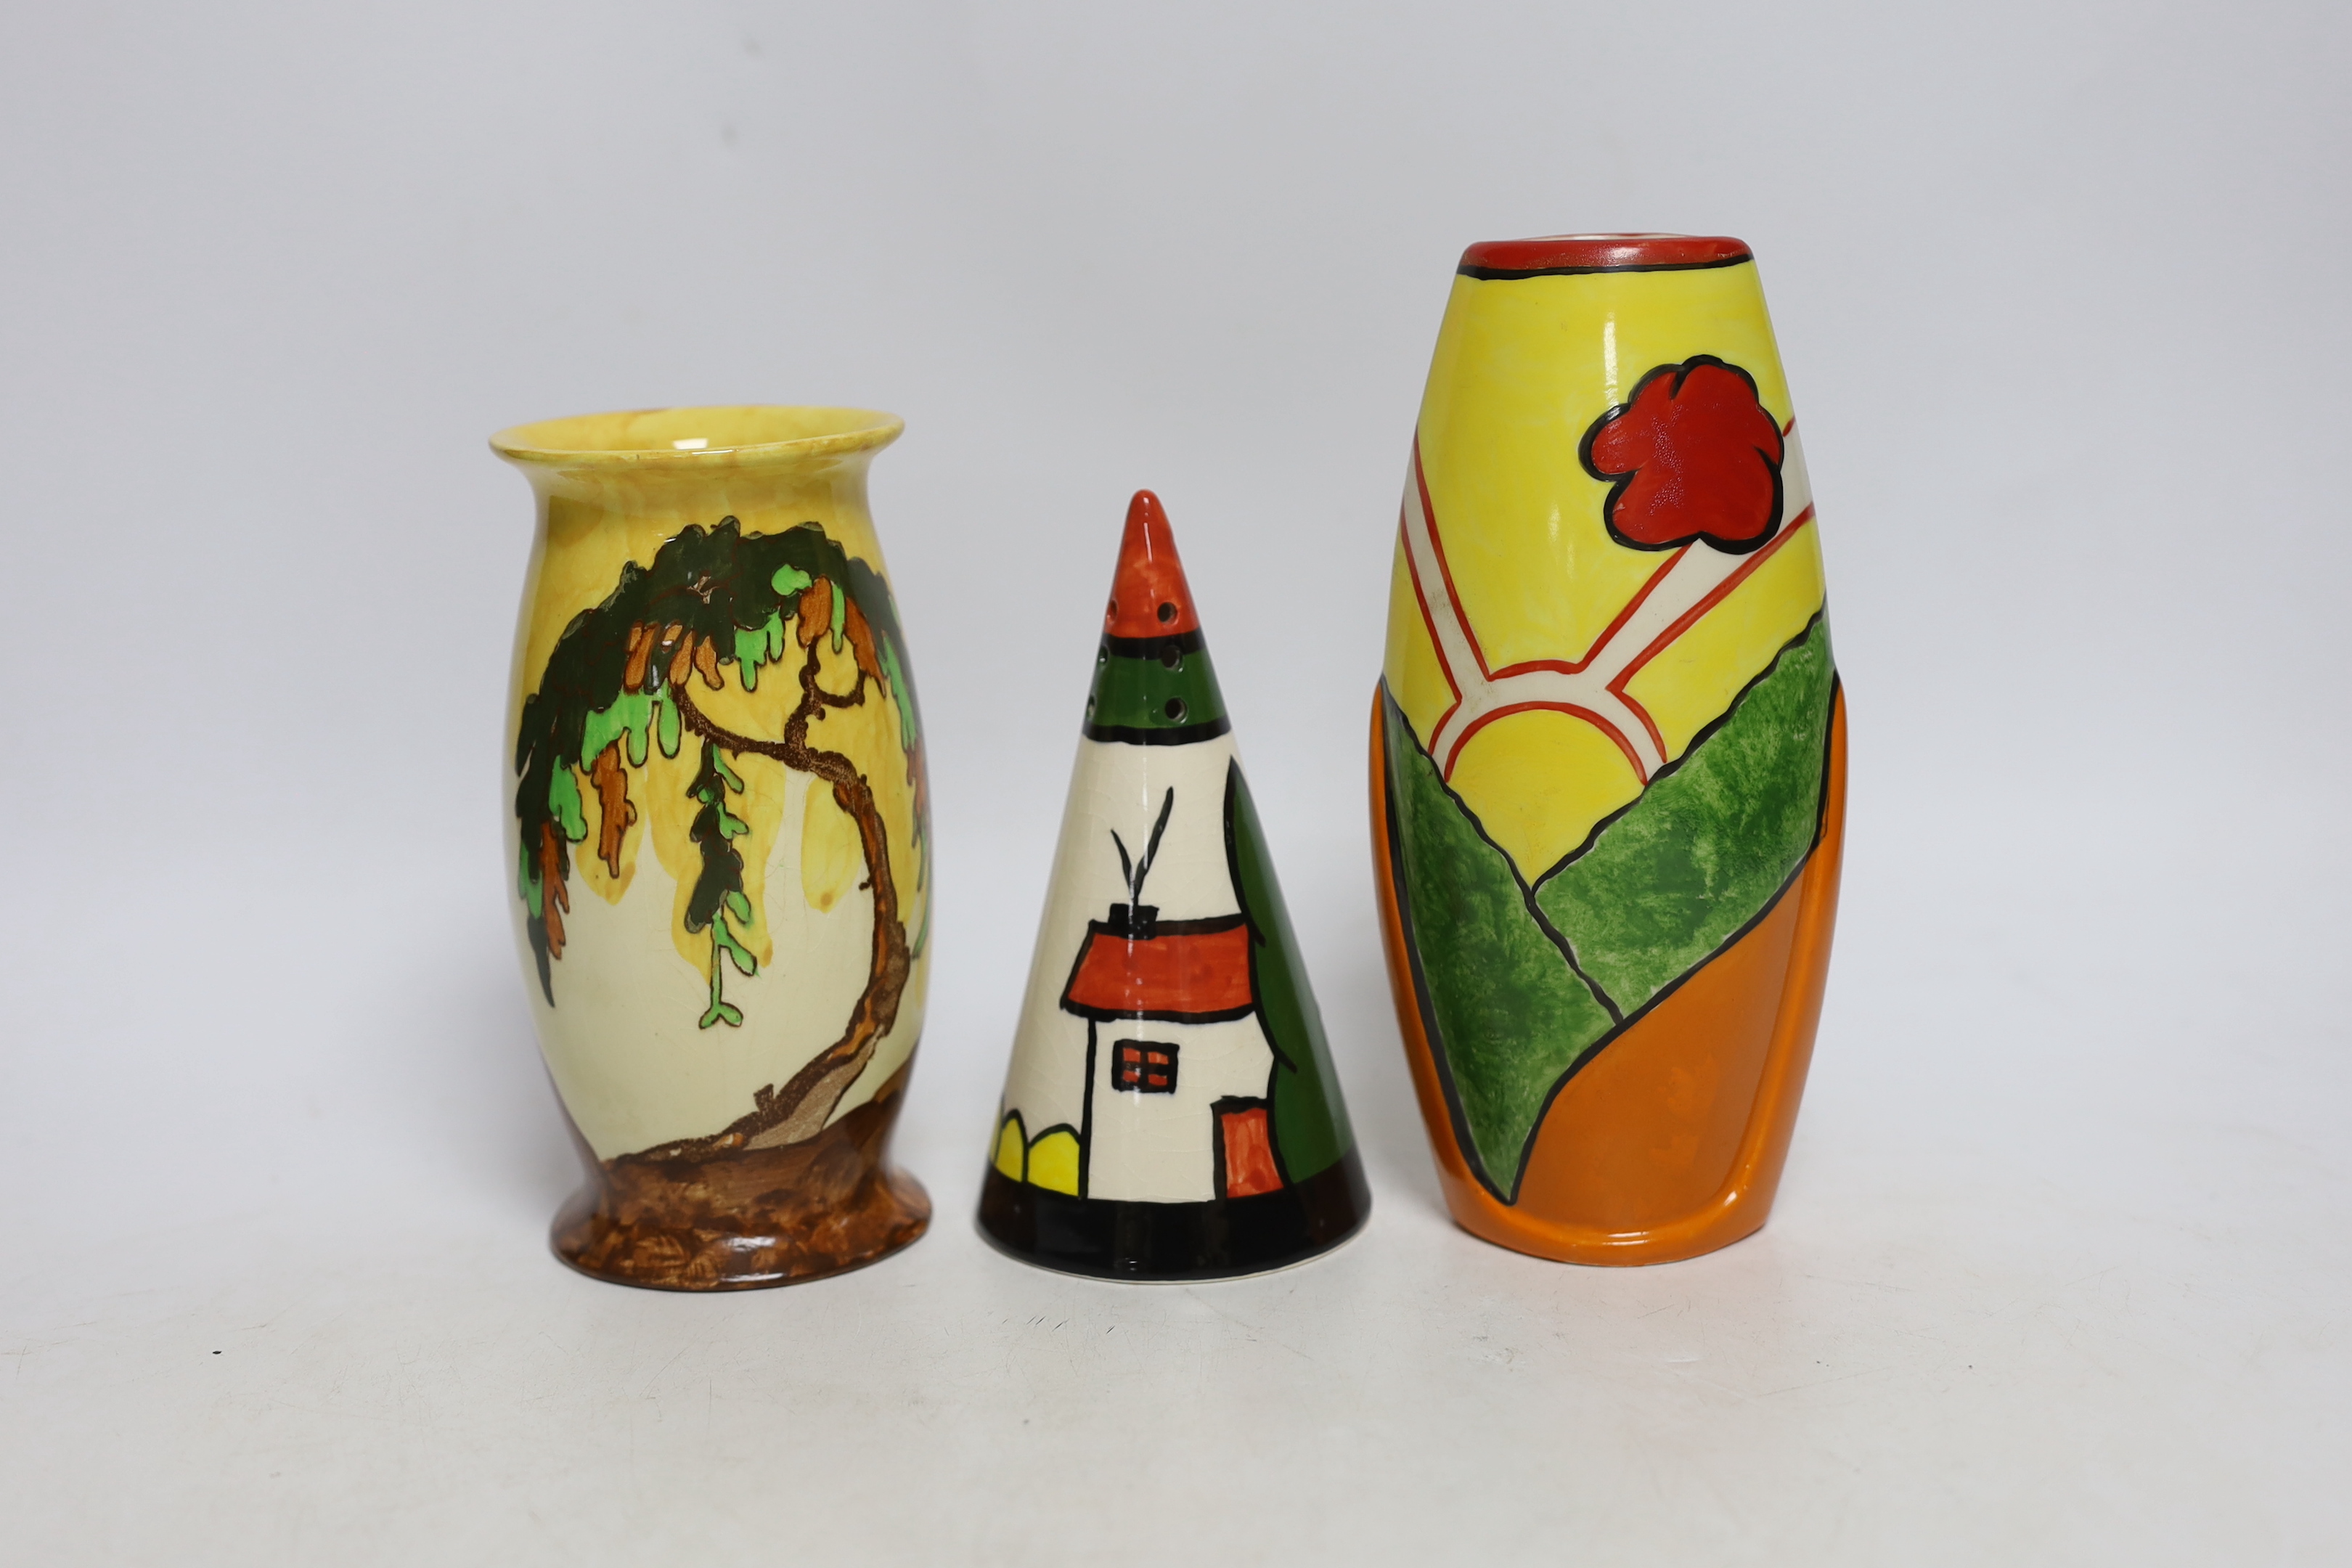 A Bernadette Eve “House” hand painted conical sugar sifter, a limited edition Heron Cross “Sunny Meadow” vase painted by Denise Steele 30/100 and a Burslem “Memory Lane” vase, all in Clarice Cliff style, tallest 18.5cm